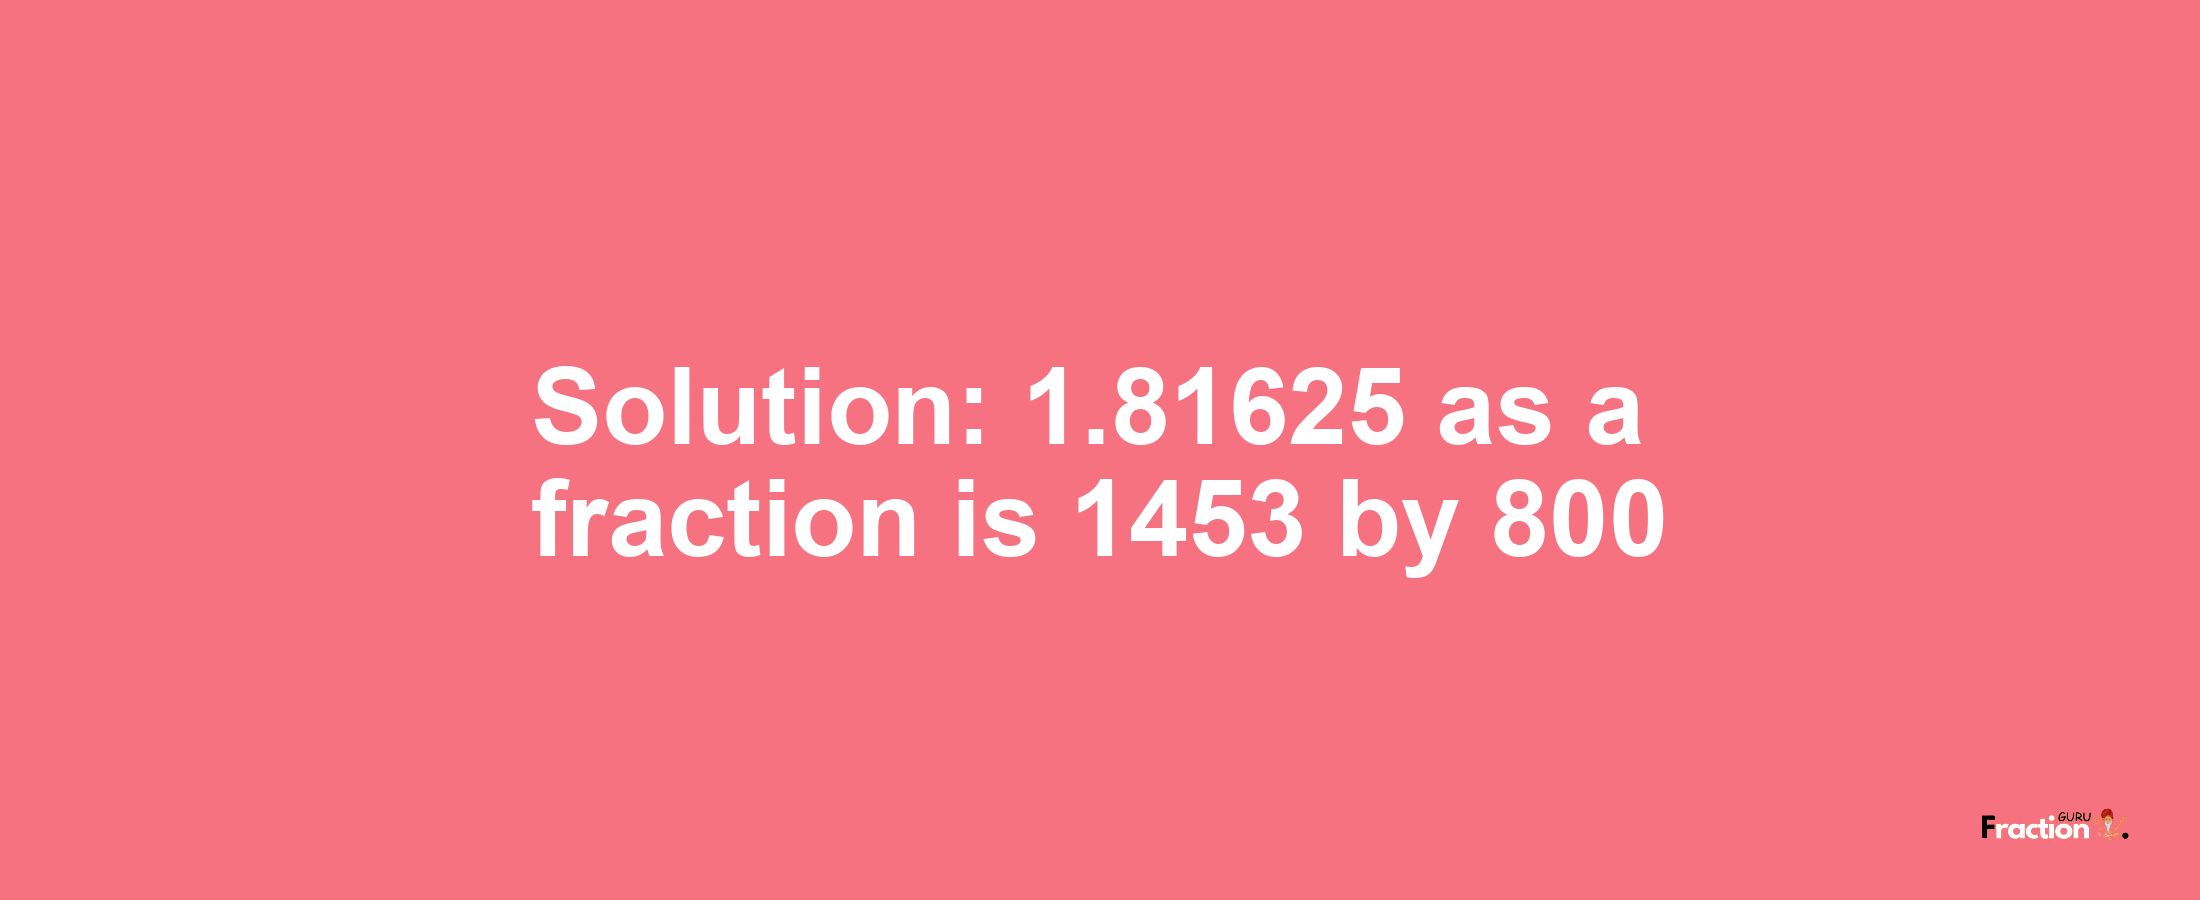 Solution:1.81625 as a fraction is 1453/800